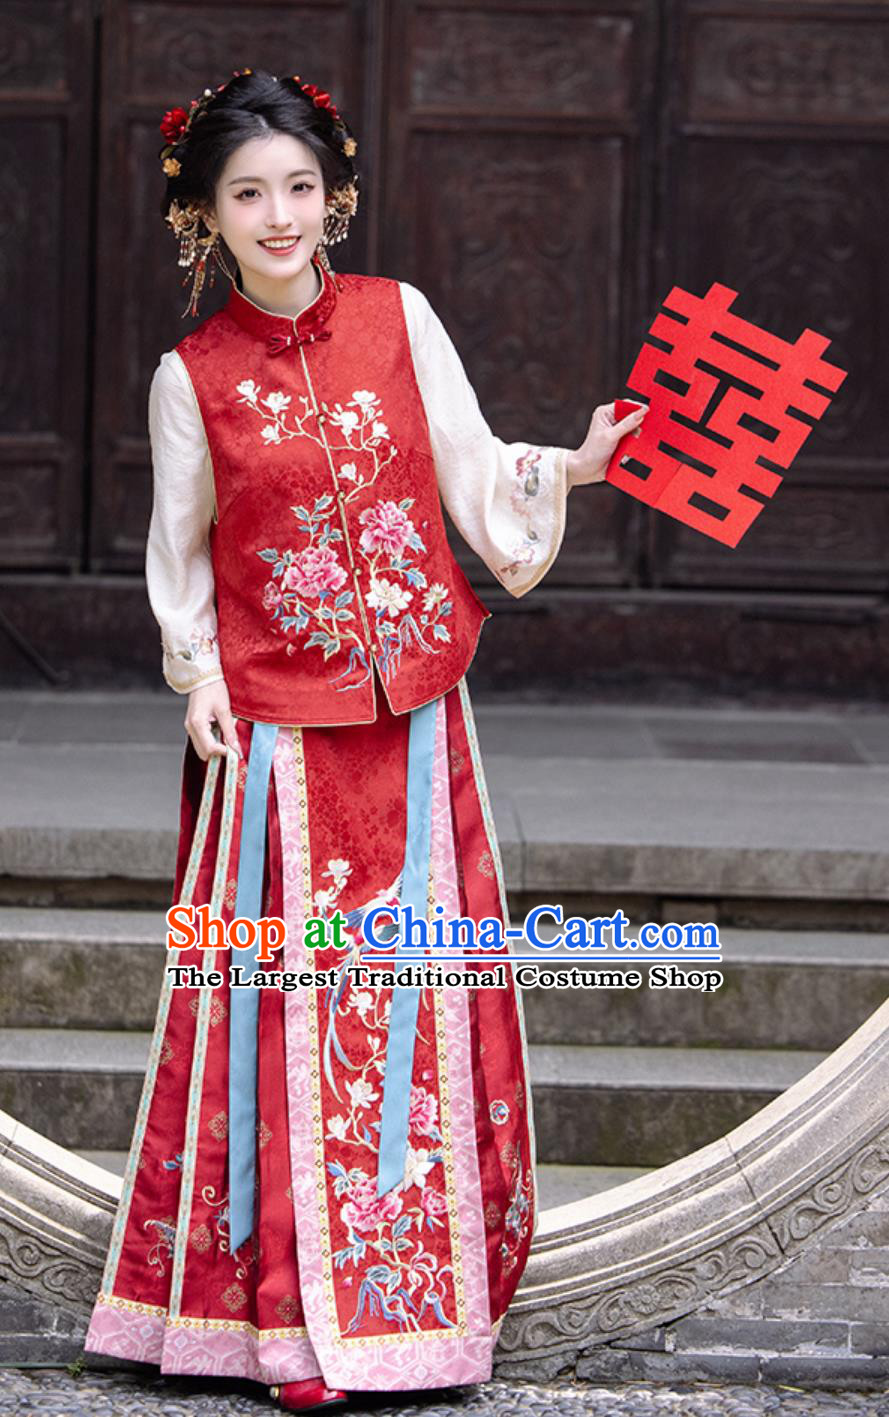 China Traditional Wedding Costume Ancient Chinese Clothing Minguo Bride Embroidered Attire